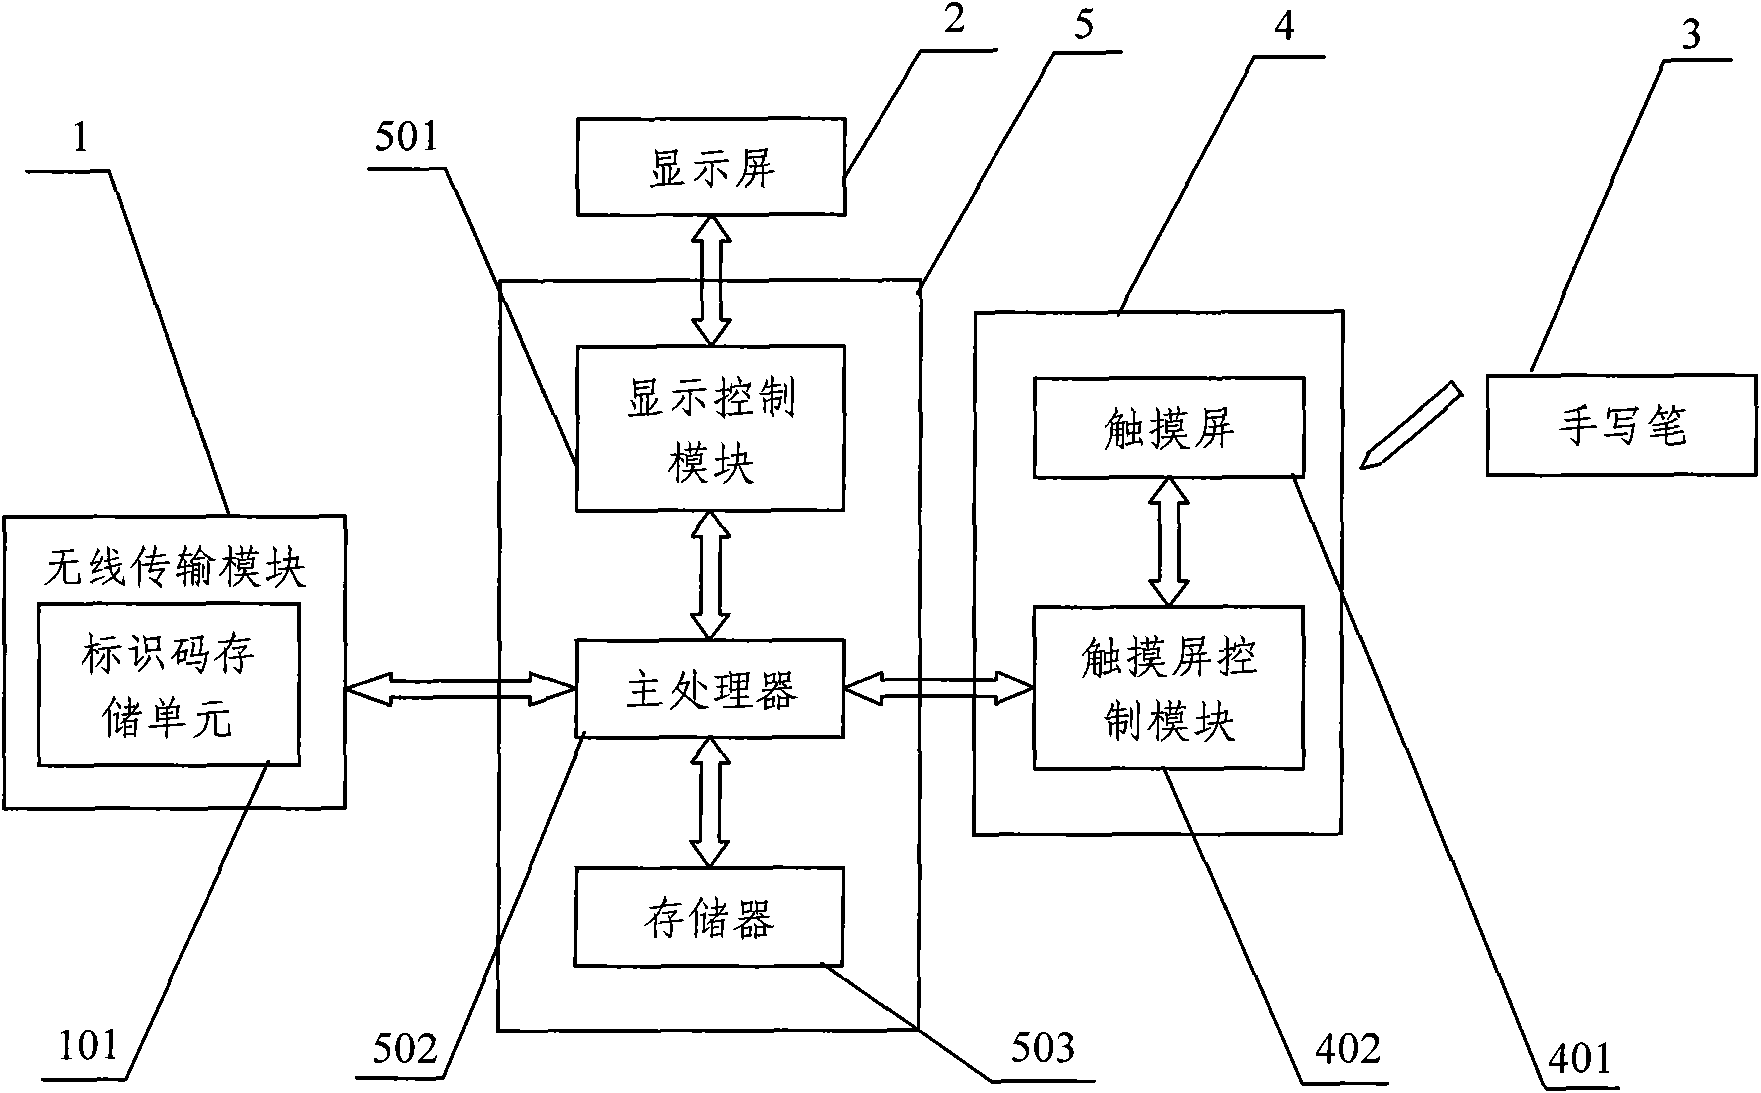 Handwriting interaction reader, system and method